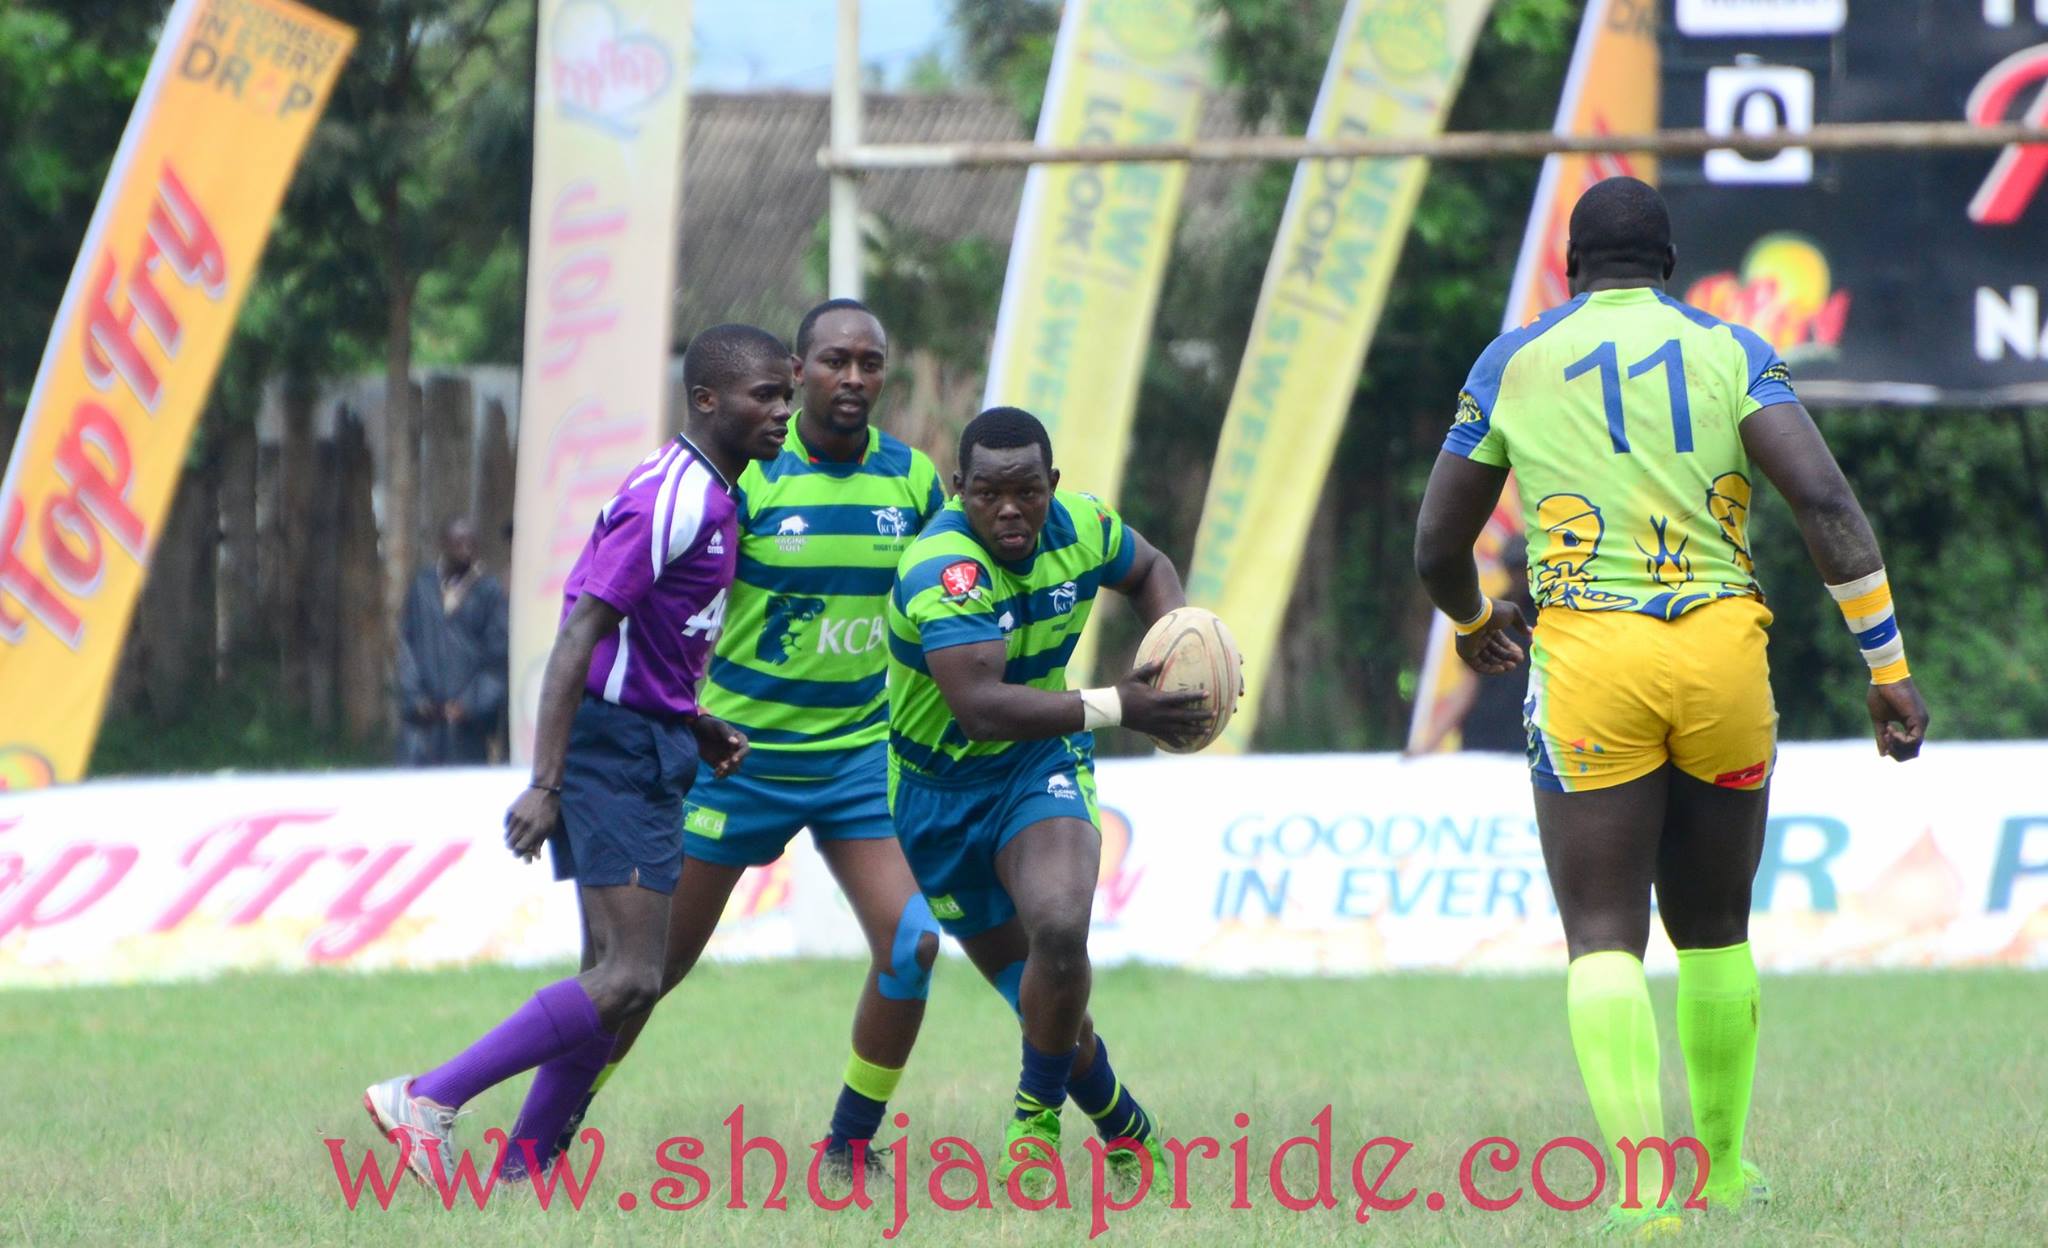 KCB' FLOODIES FOCUS SHIFTS TO THE SEMIS